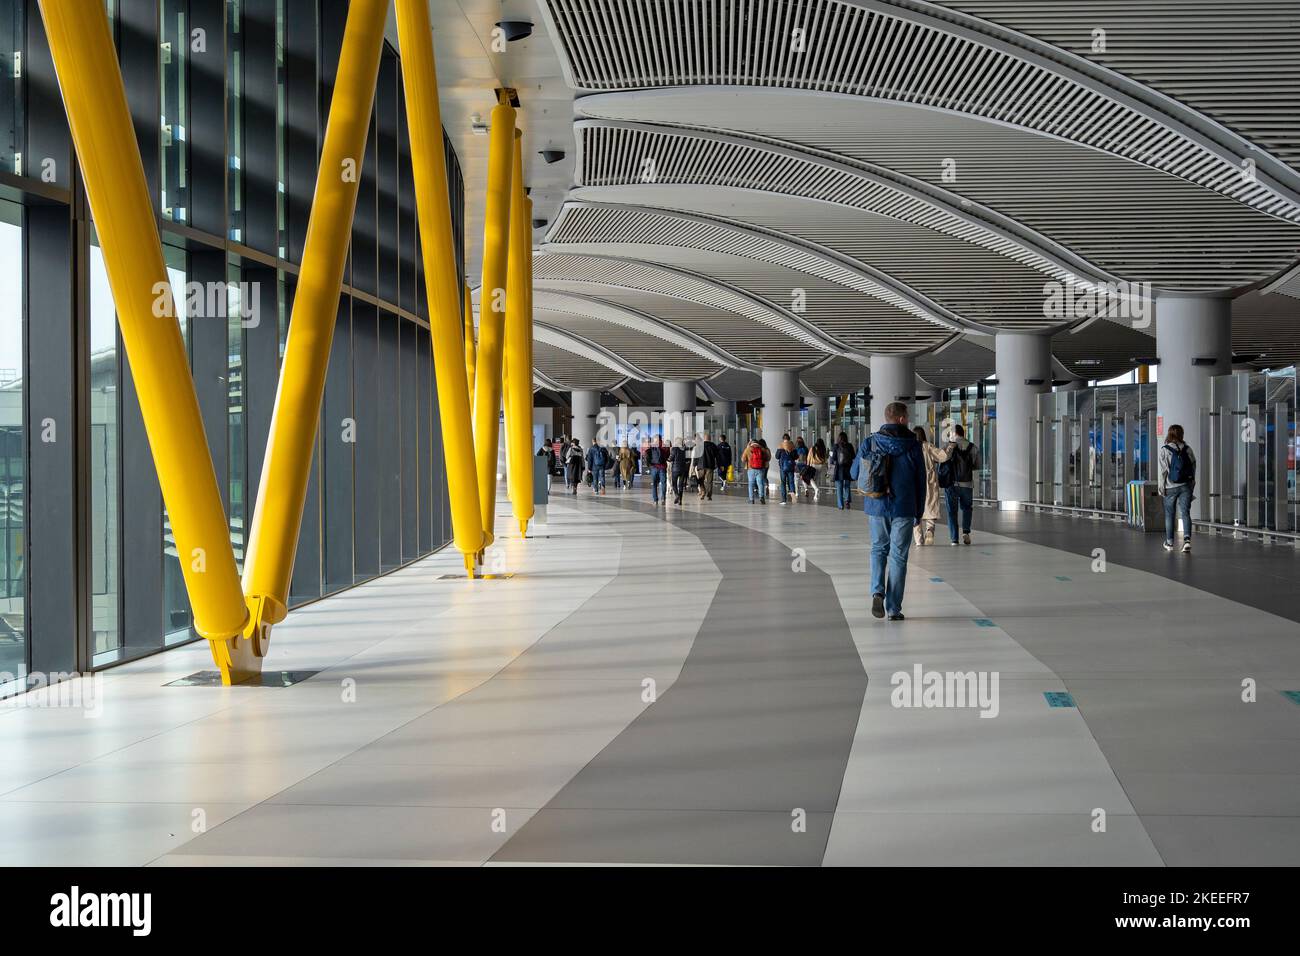 ISTANBUL - OCT 15: Passengers walking along the corridor of the new terminal Istanbul Havalimani airport on October 15. 2021 in Turkey Stock Photo